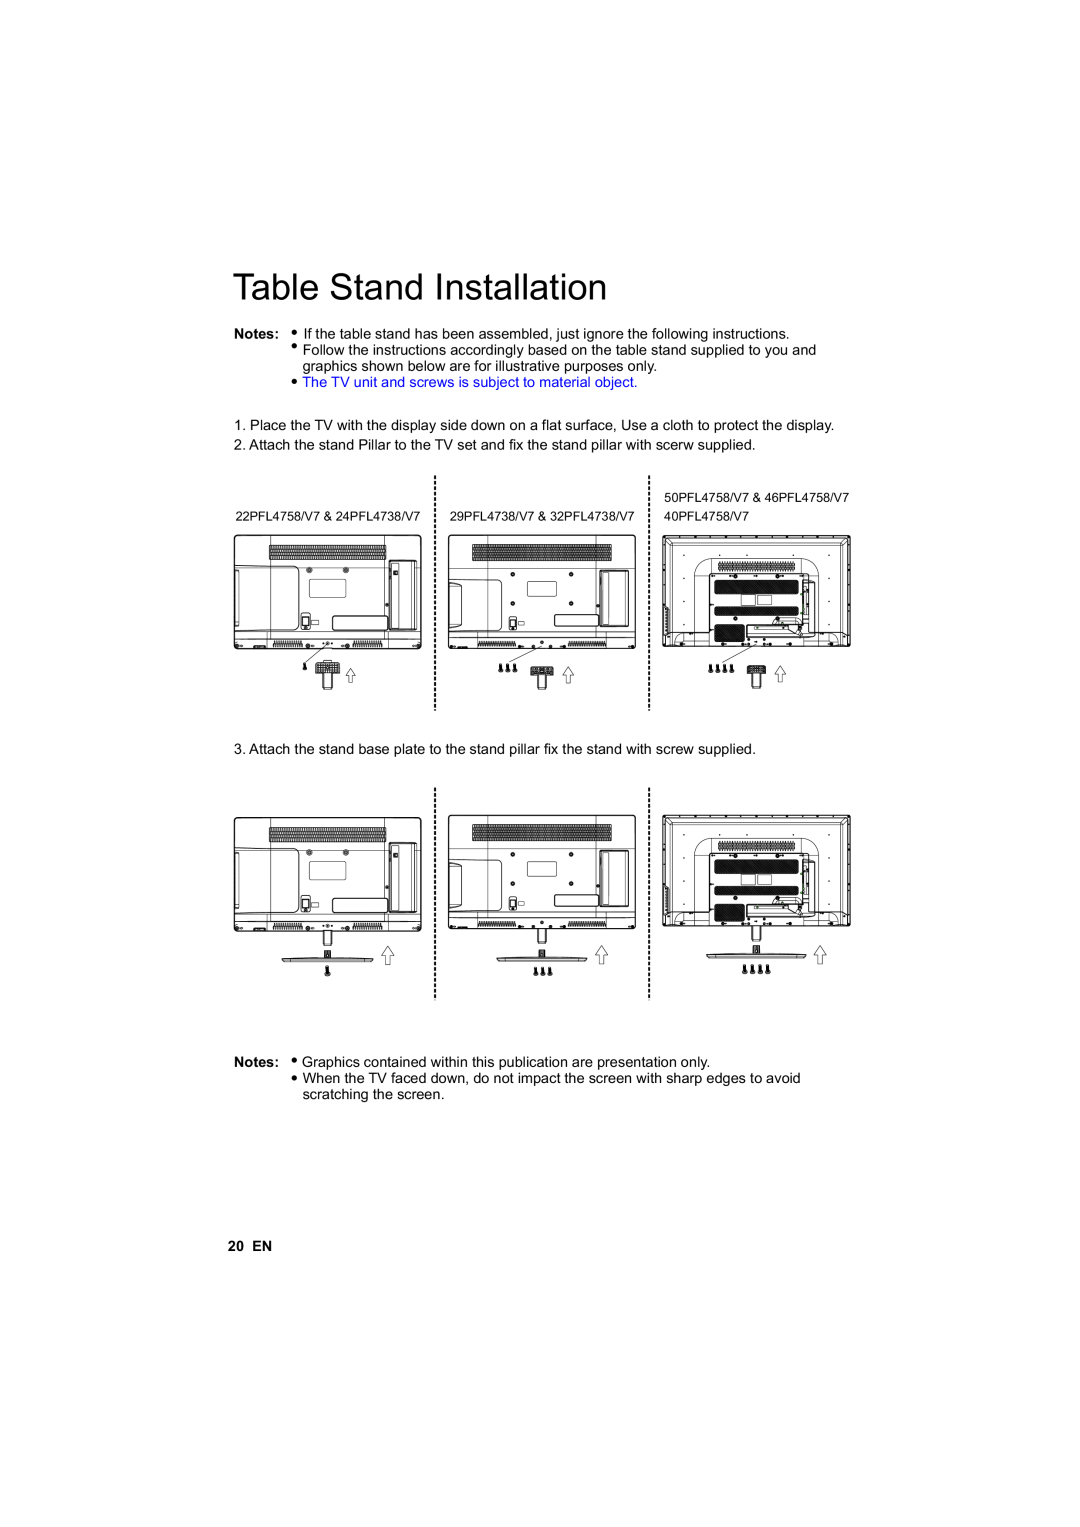 Philips 40PFL4758/V7, 50PFL4758/V7 Table Stand Installation, The TV unit and screws is subject to material object, 20 EN 